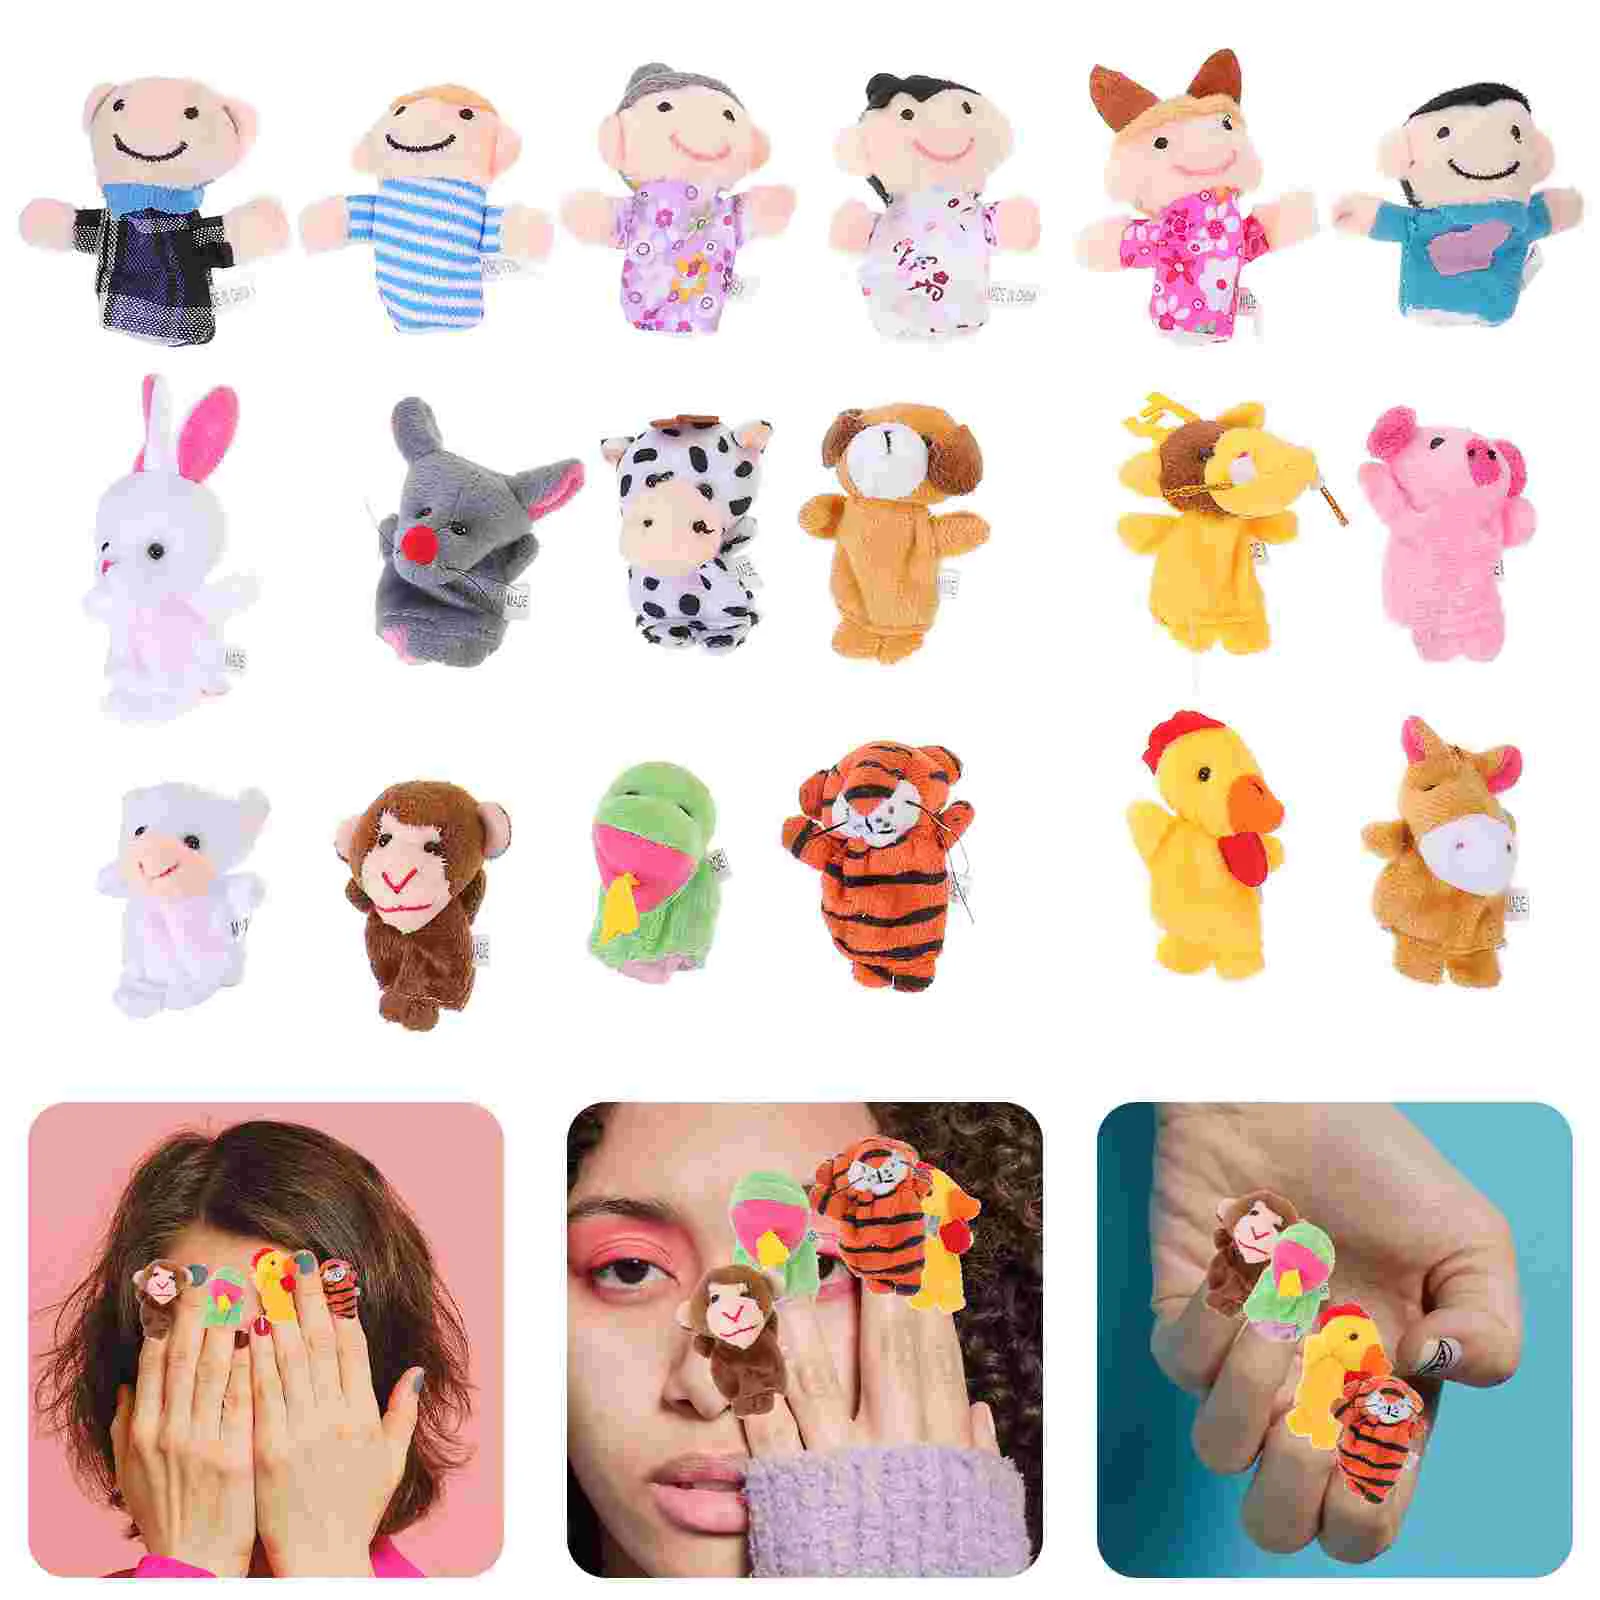 18pcs Plush Finger Puppets Dolls Hand Toys 12 Puppets 6 People(Mixed Style) for Kids Babies Talking Story Birthday Party Favors